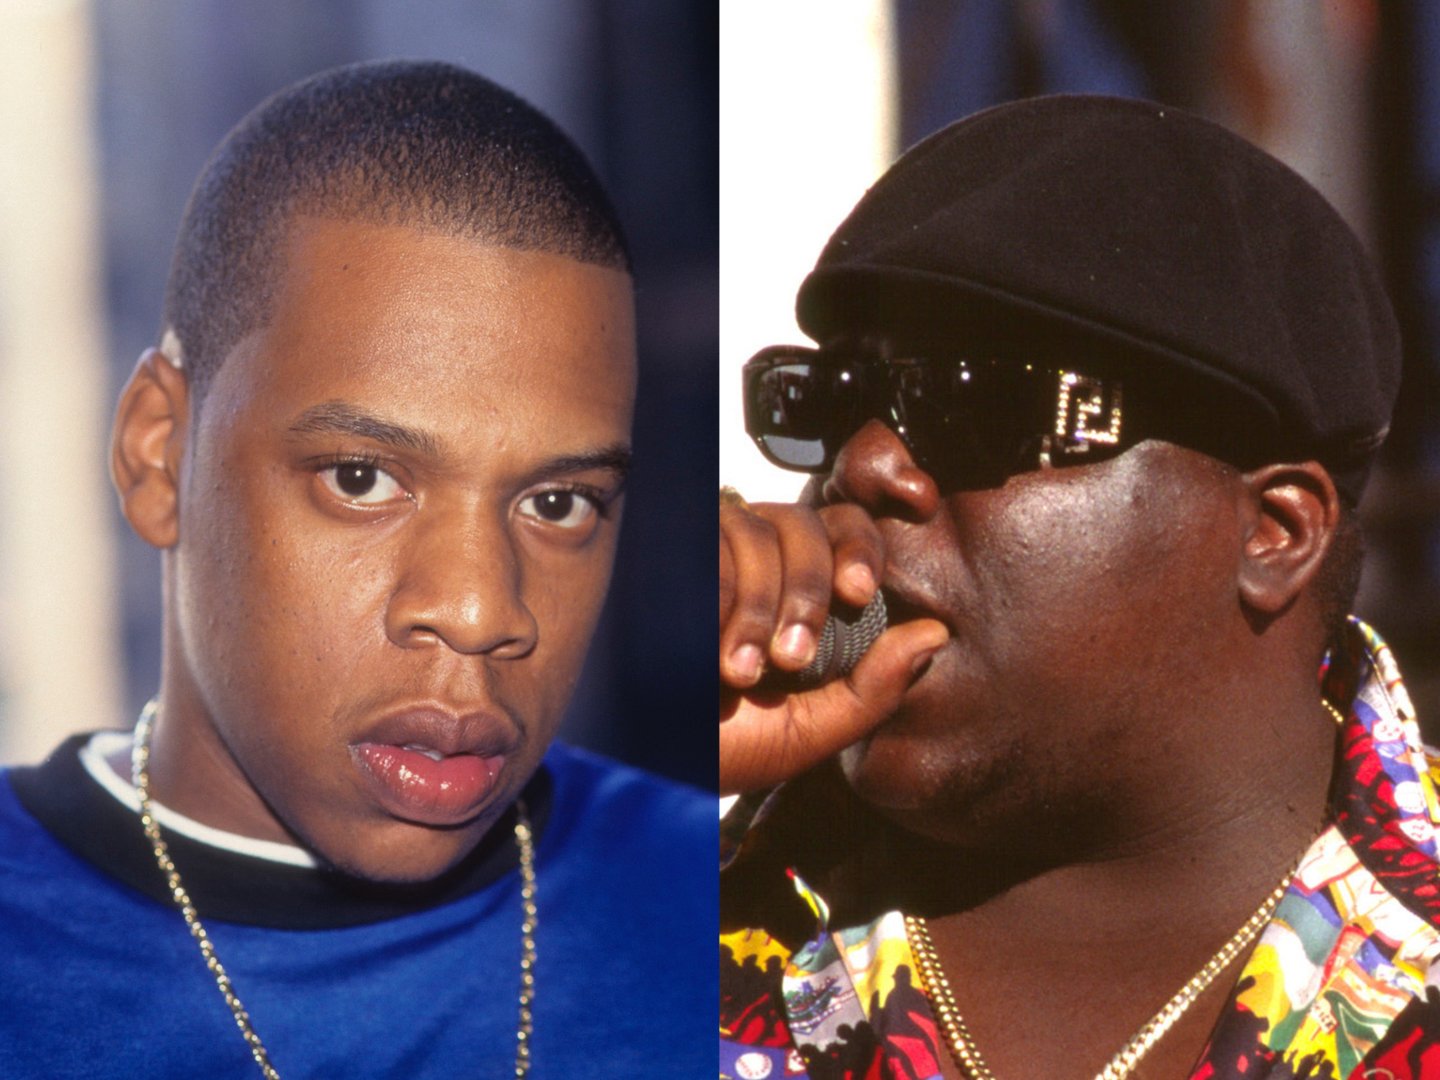 The Notorious B.I.G. and Jay-Z Were 'Going at It' While Recording